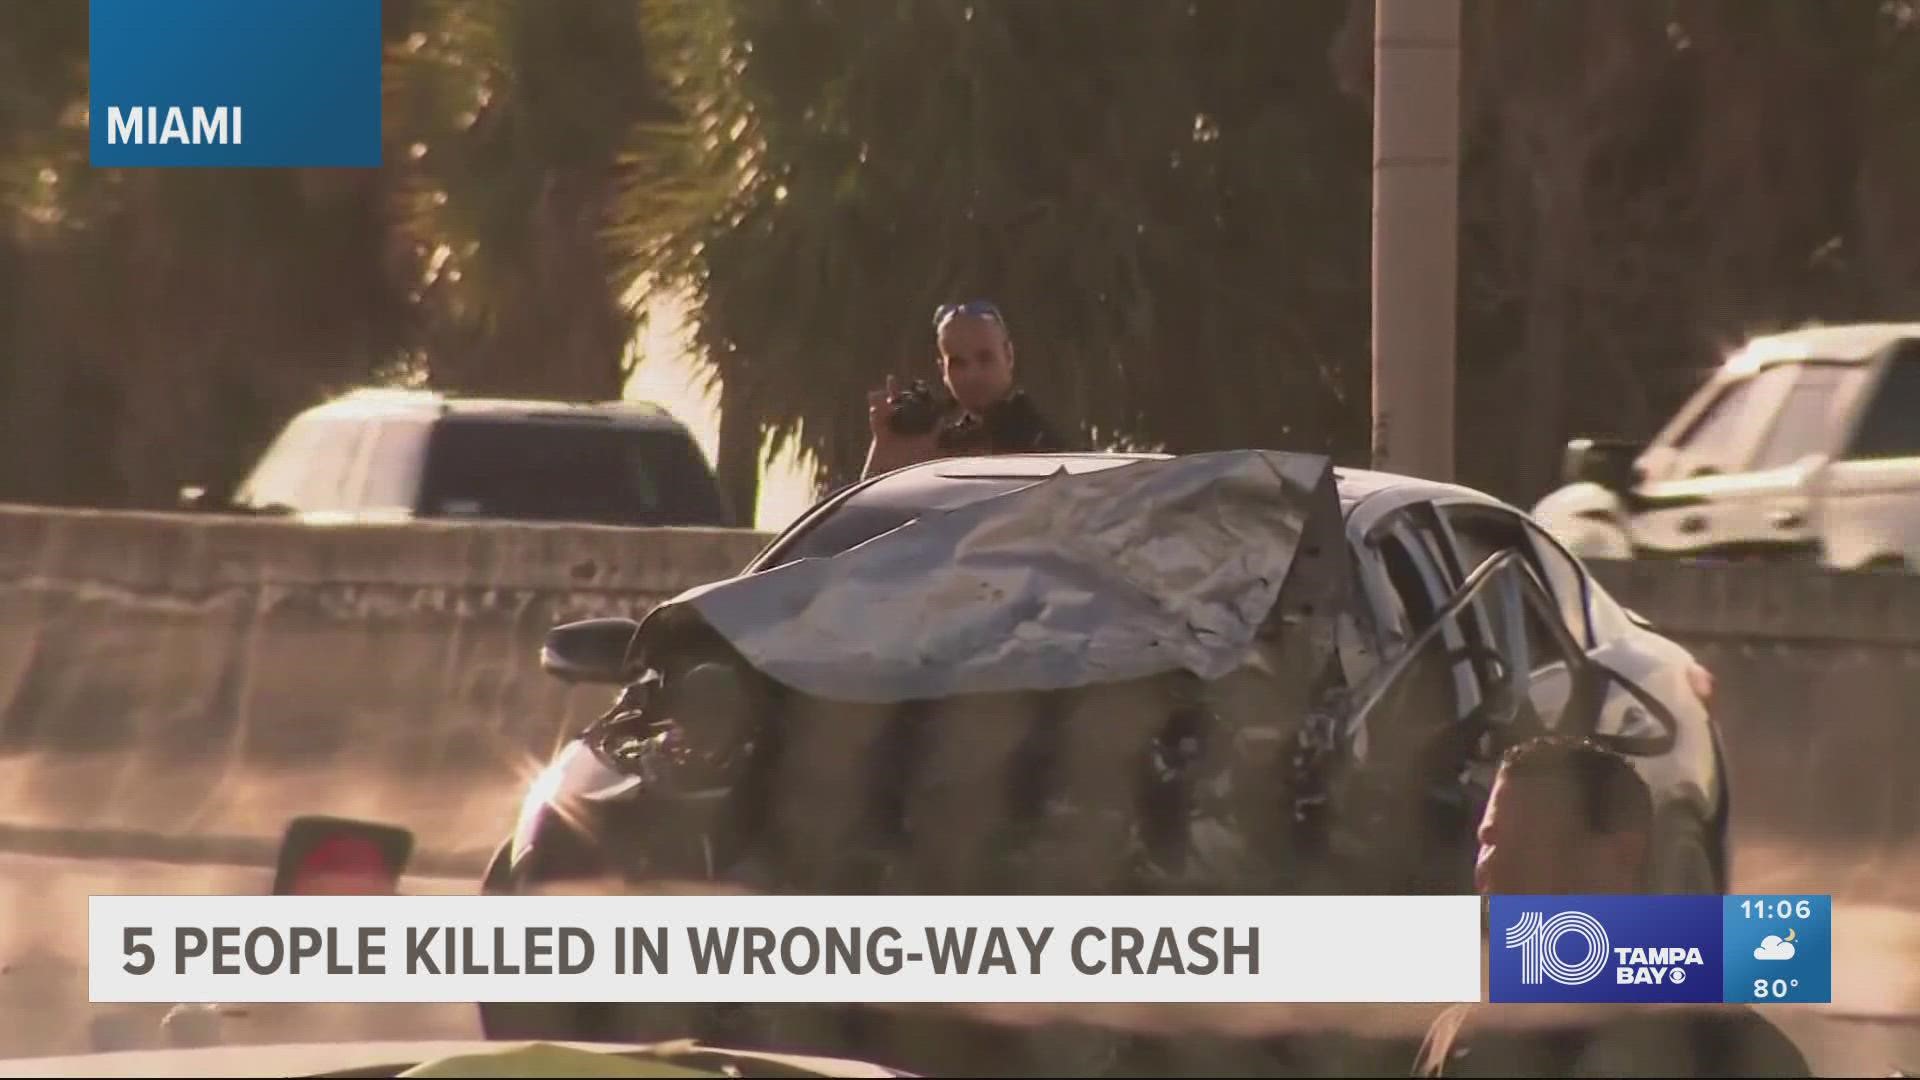 A man was airlifted to a trauma center with serious injuries, according to the Florida Highway Patrol.